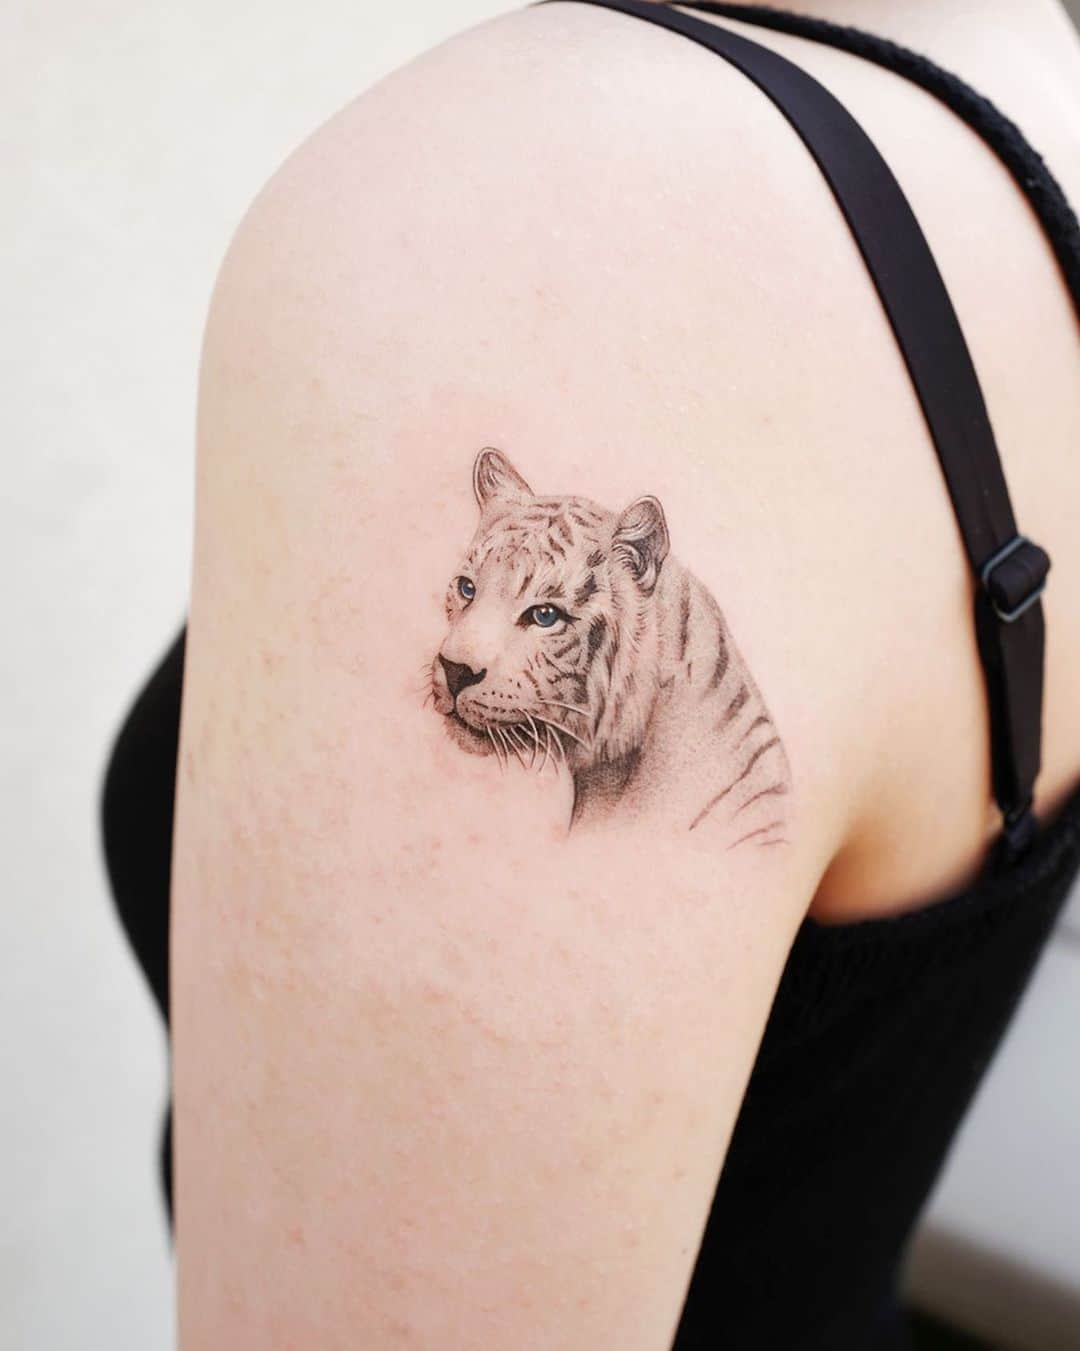 Awesome White Tiger Tattoo Design